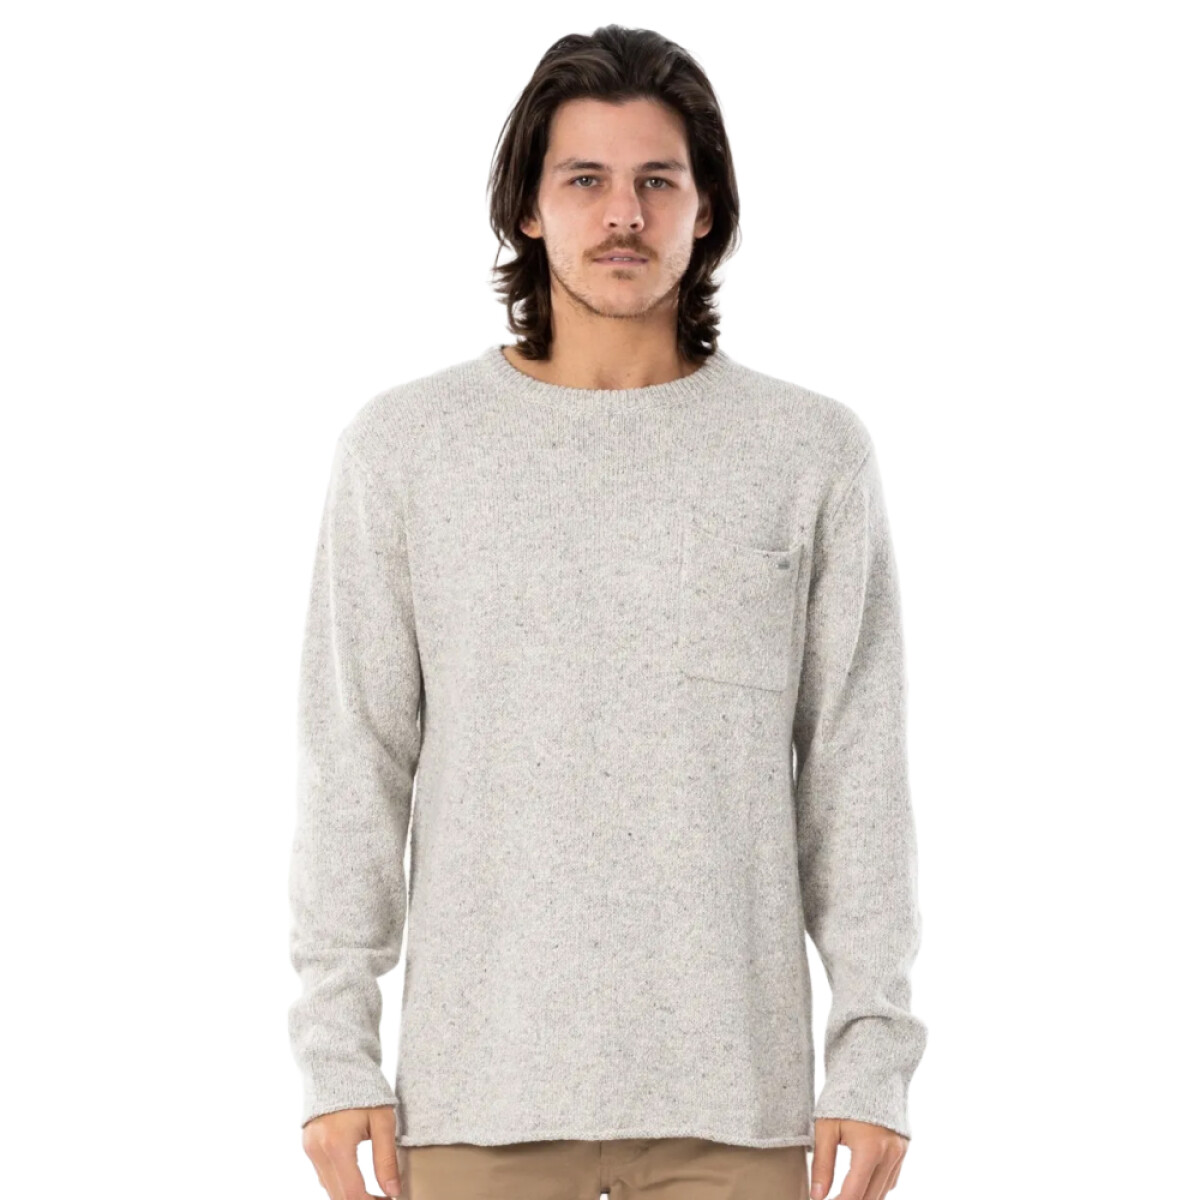 Buzo Rip Curl Neps - Gris 